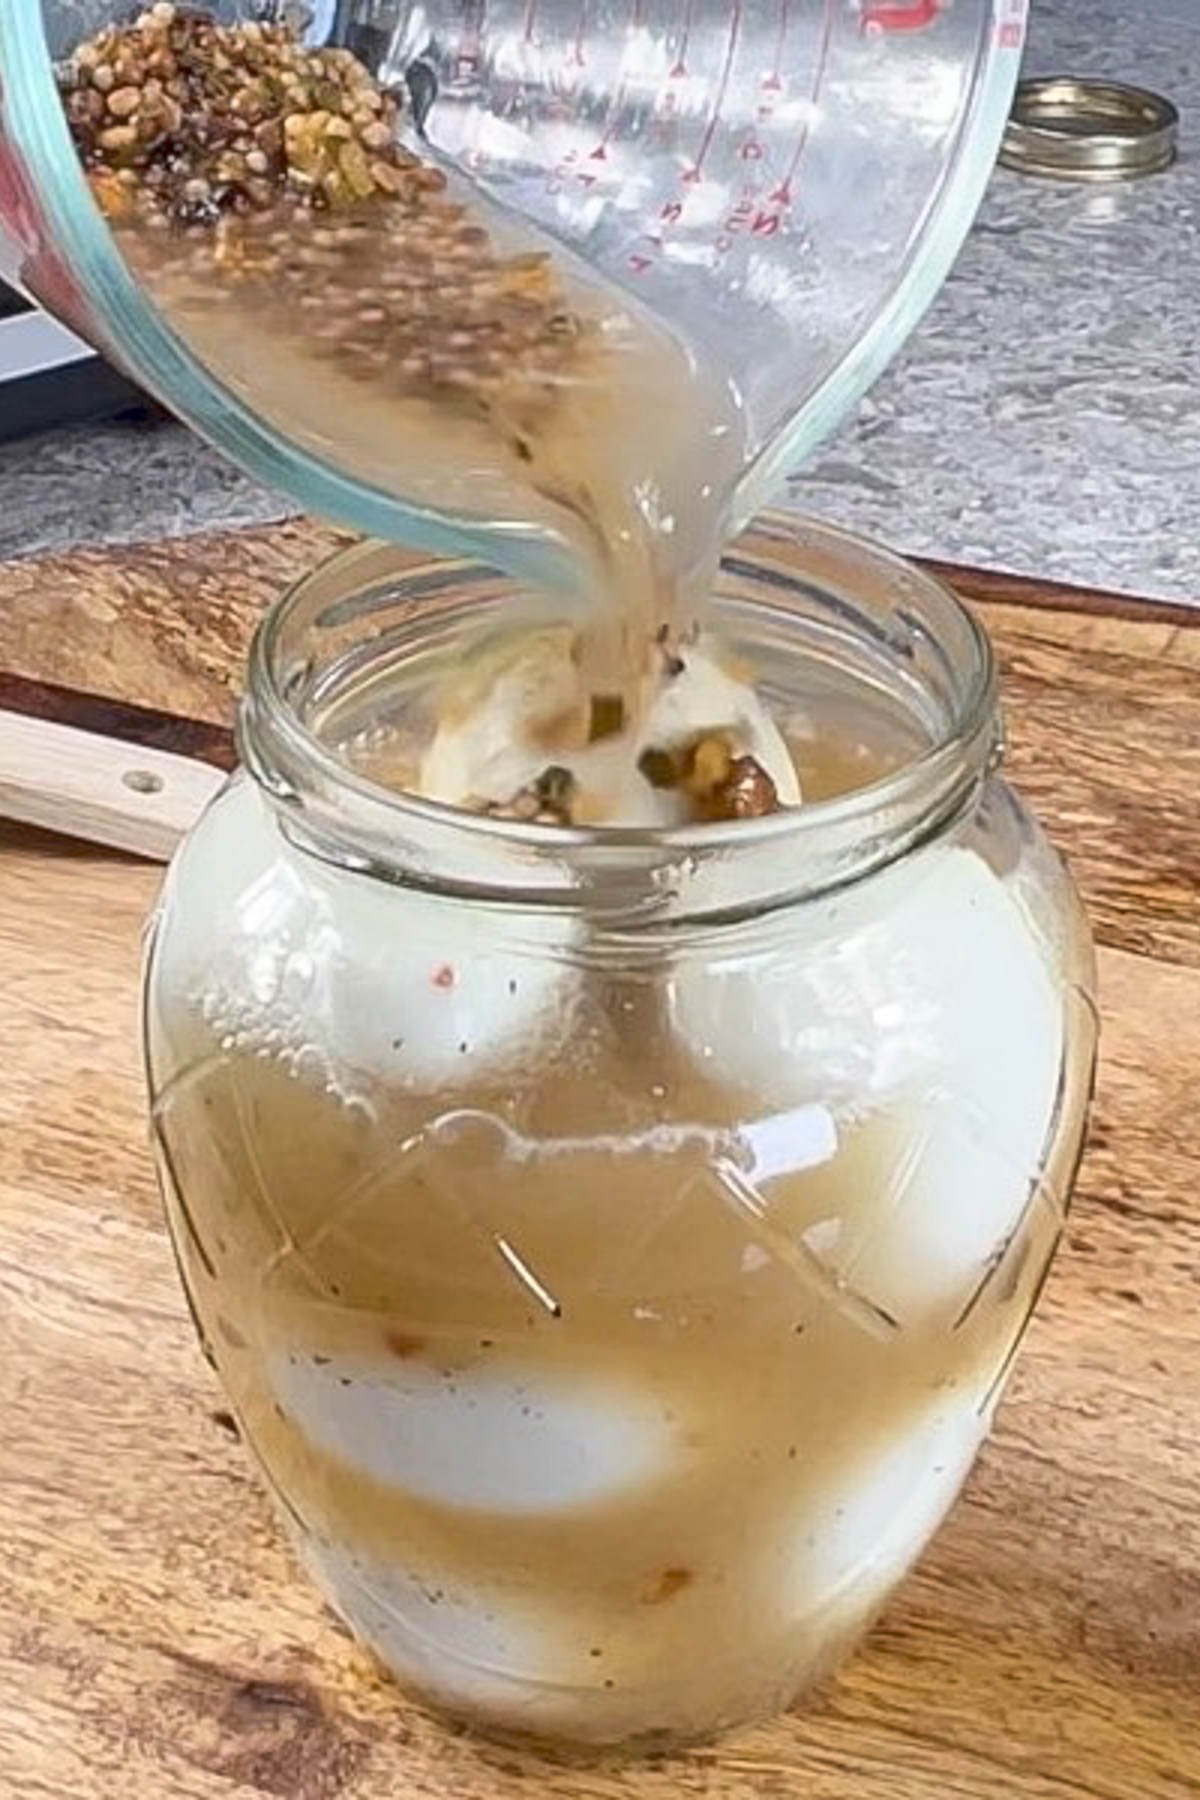 Pickle brine being poured over hard boiled eggs in glass jar.